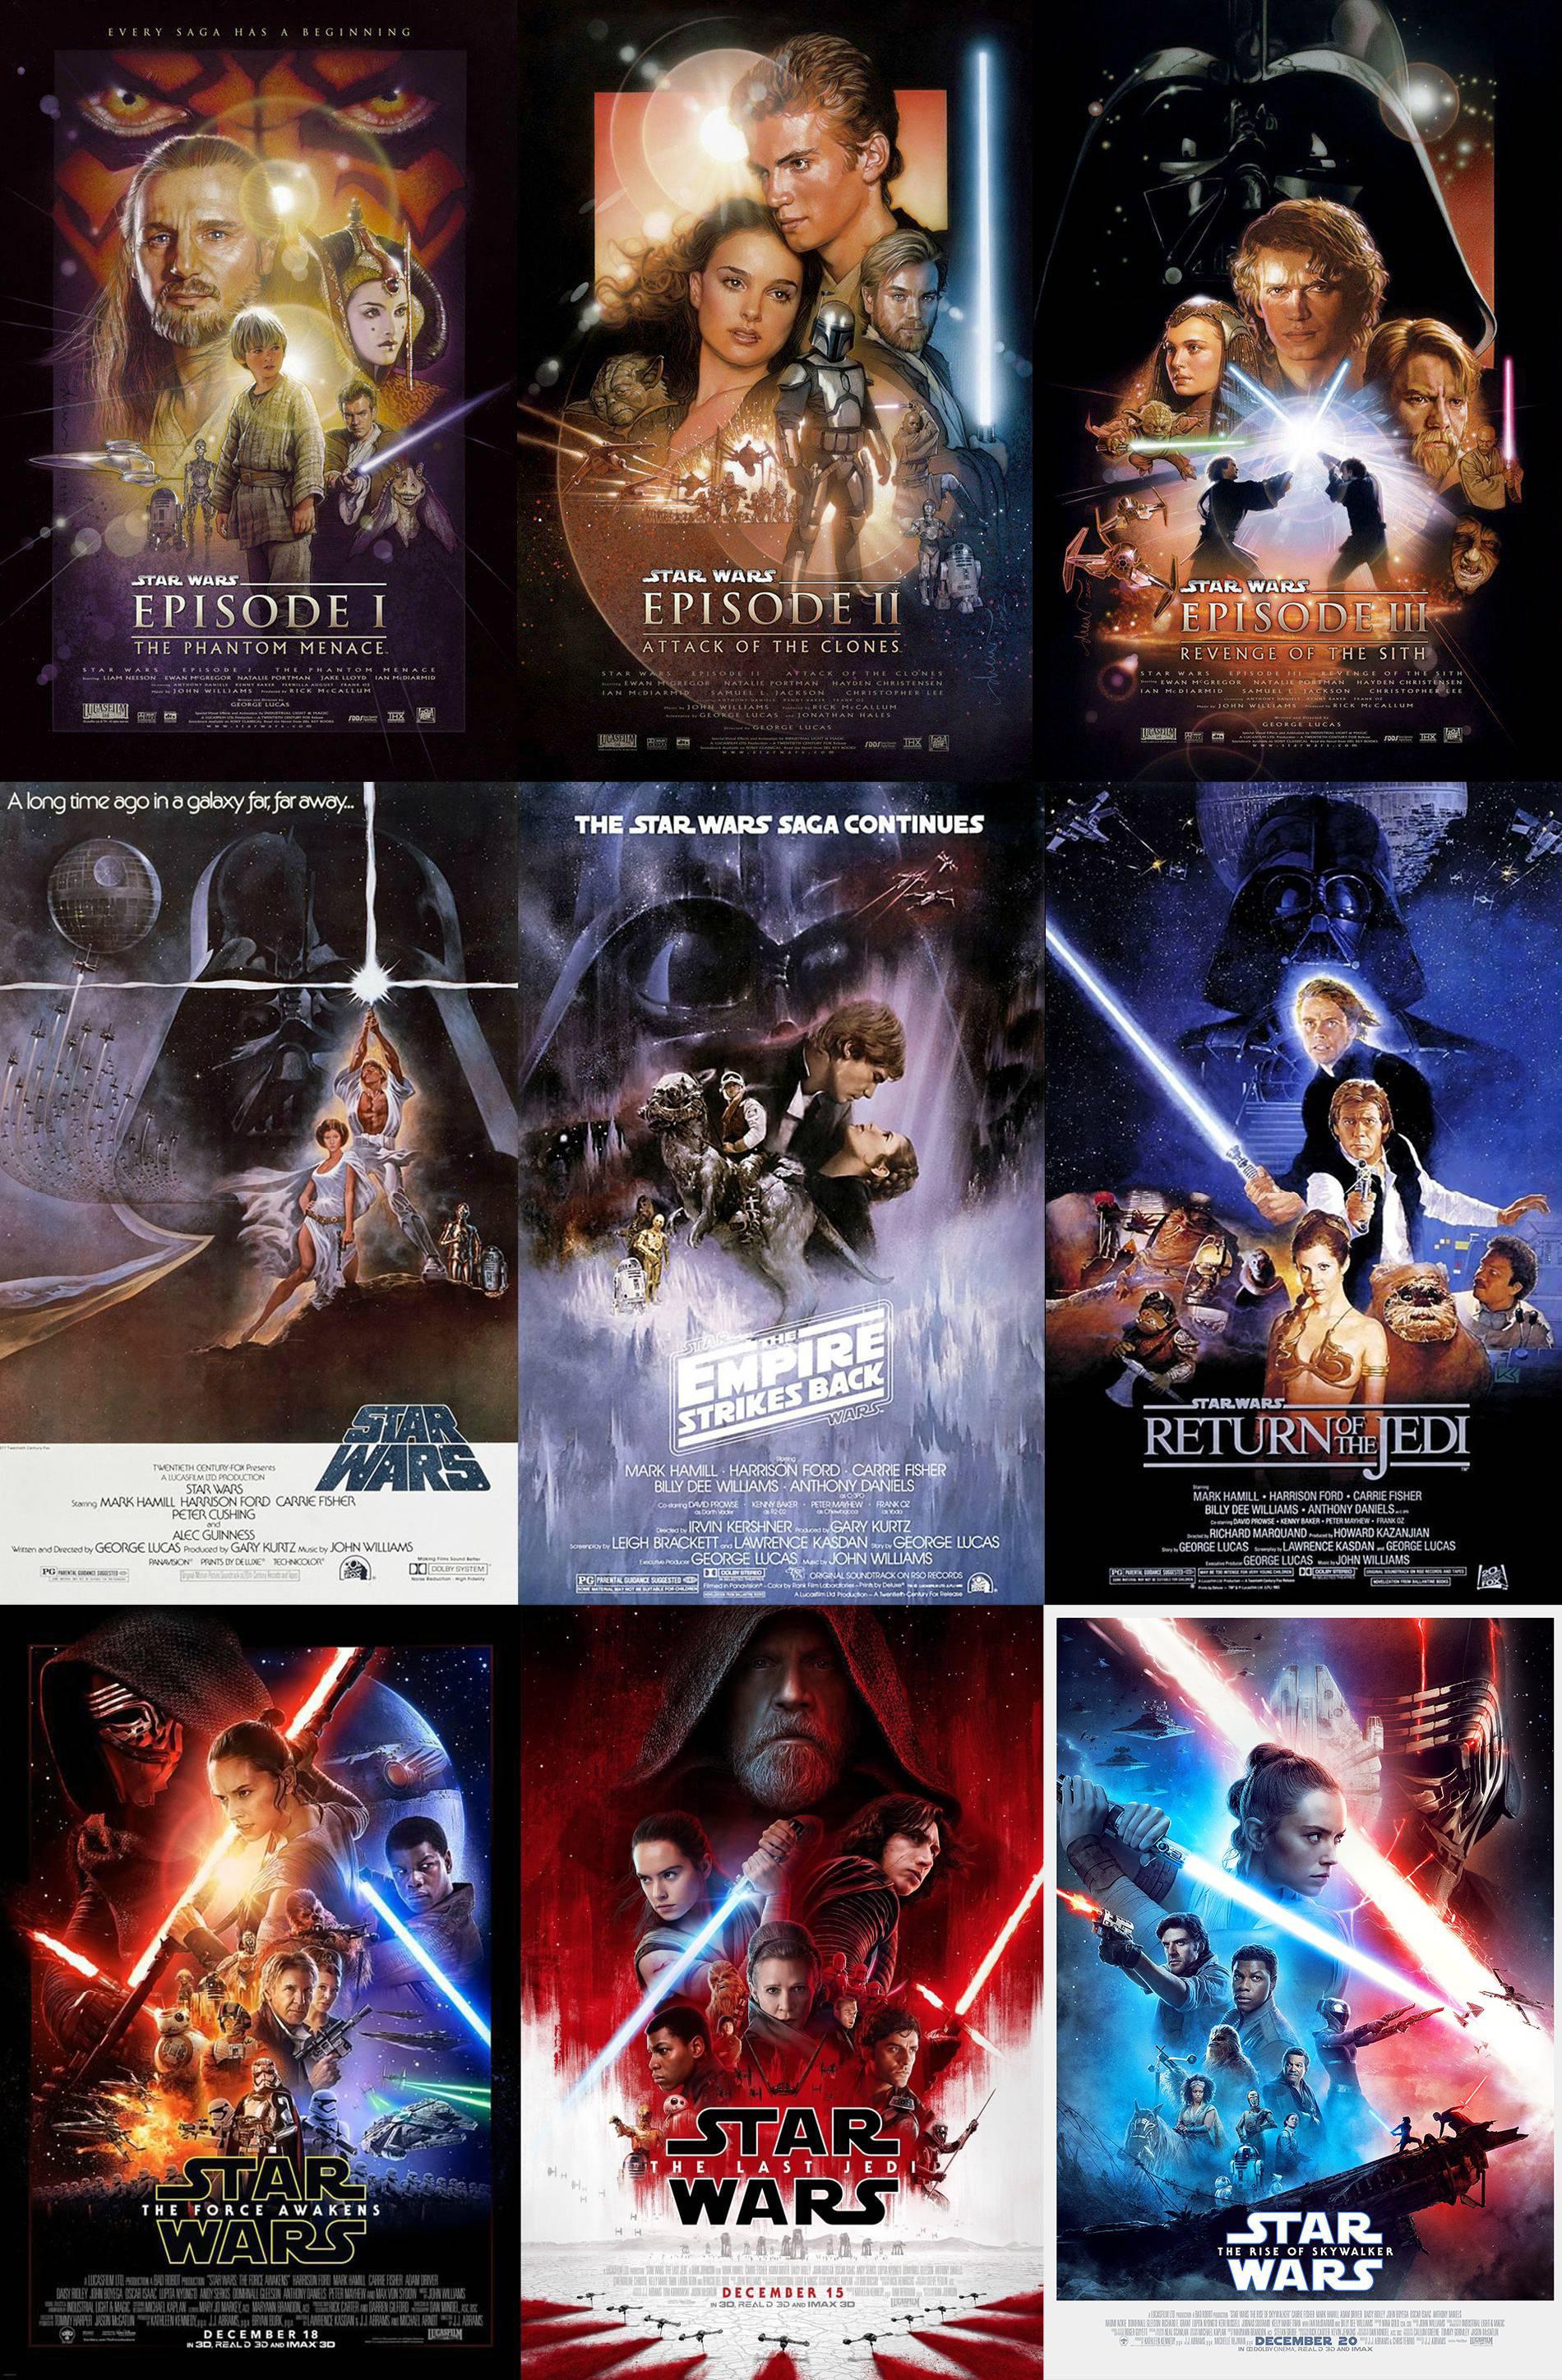 What are the different Star Wars trilogies?